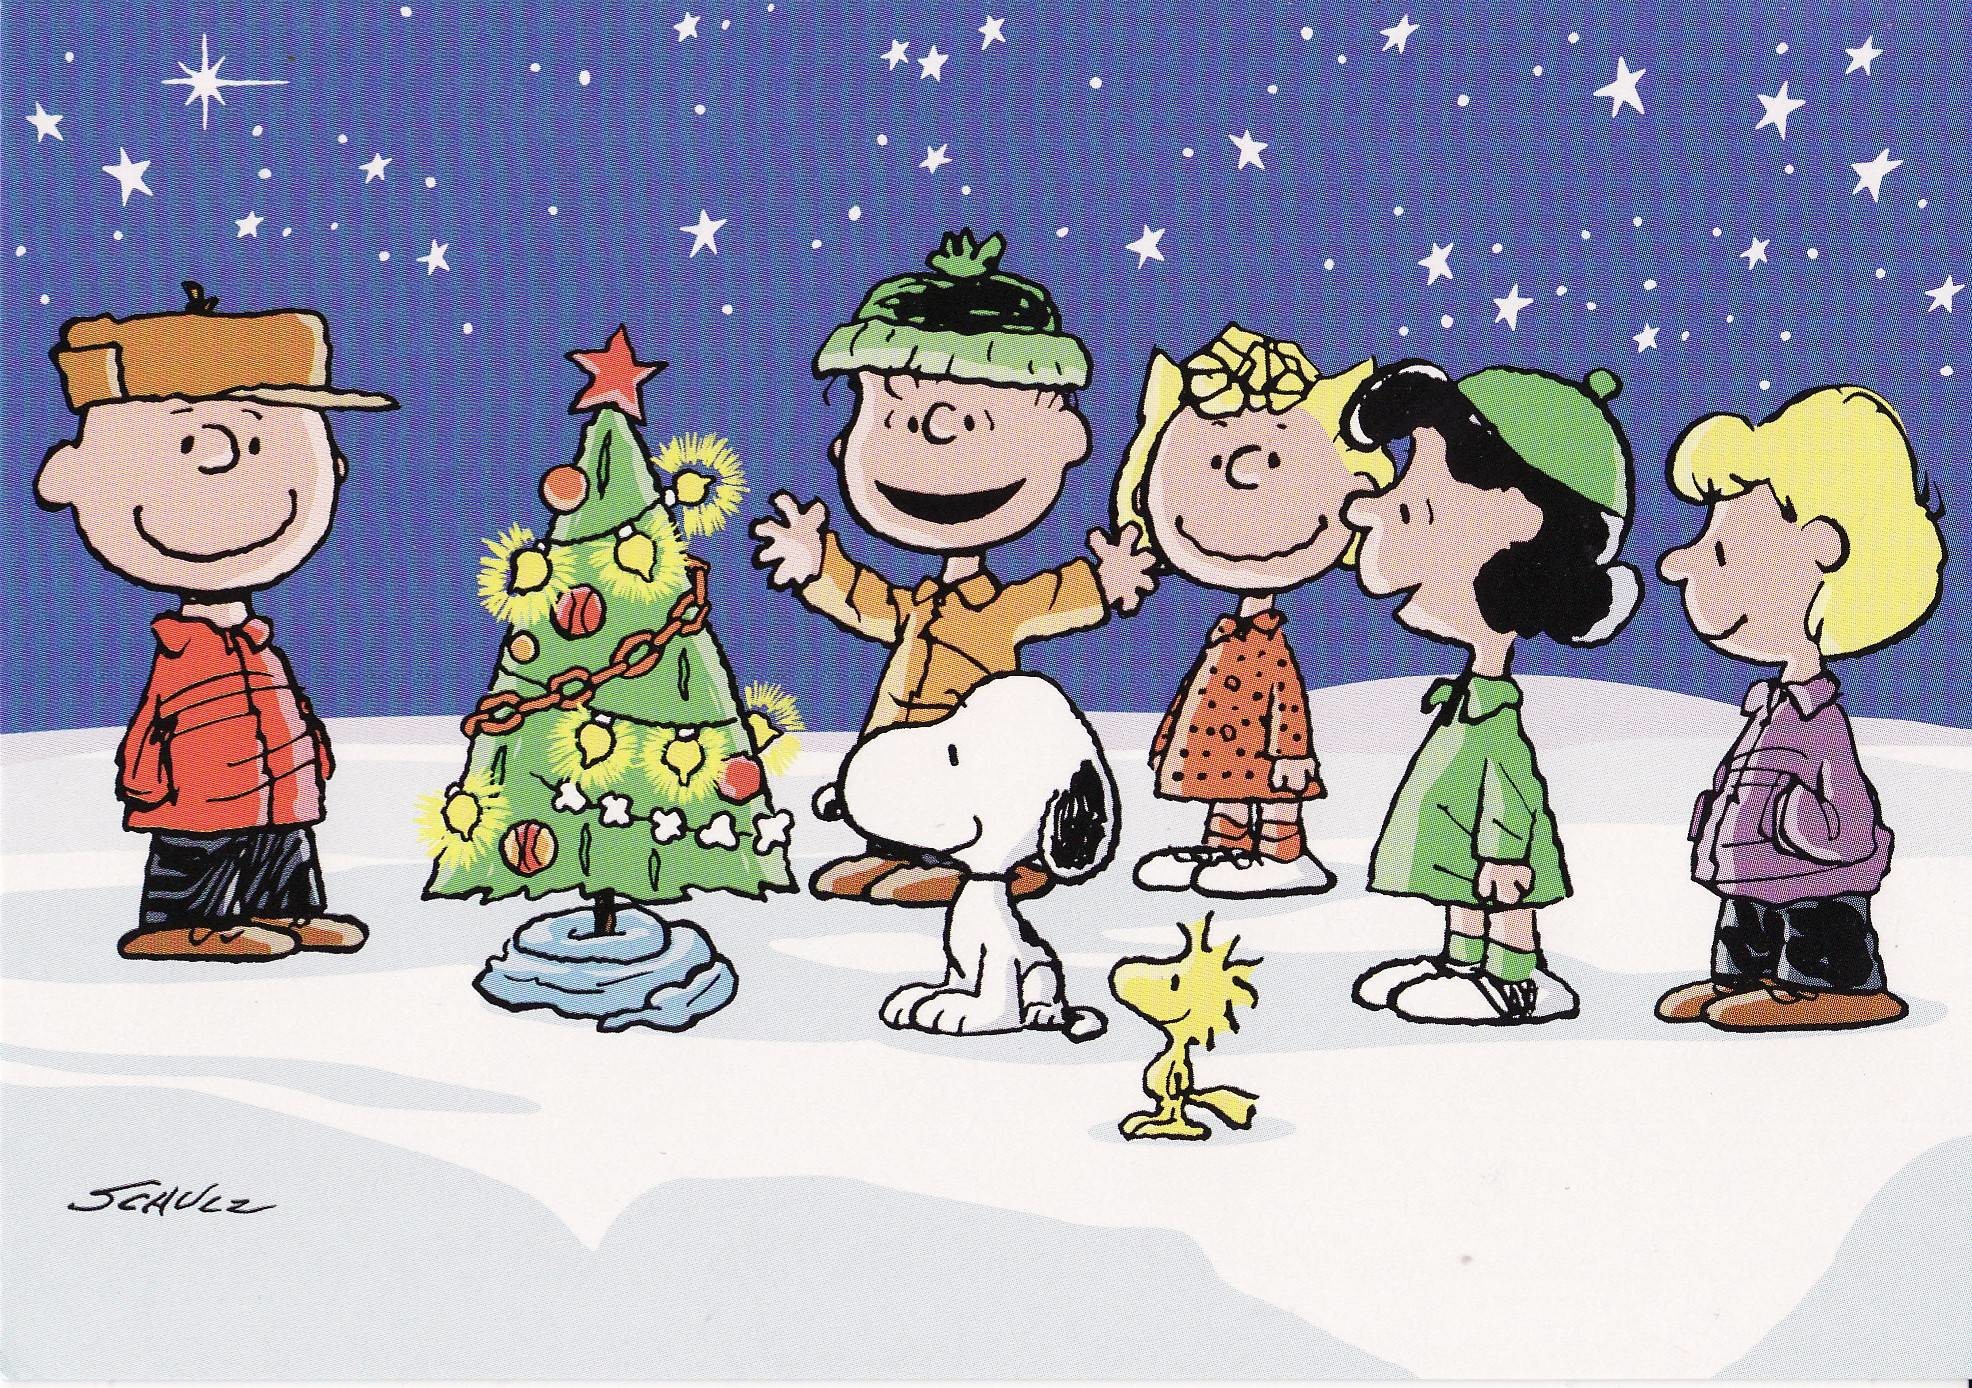 Charlie Brown Peanuts Comics Christmas Wallpaper Pictures Free